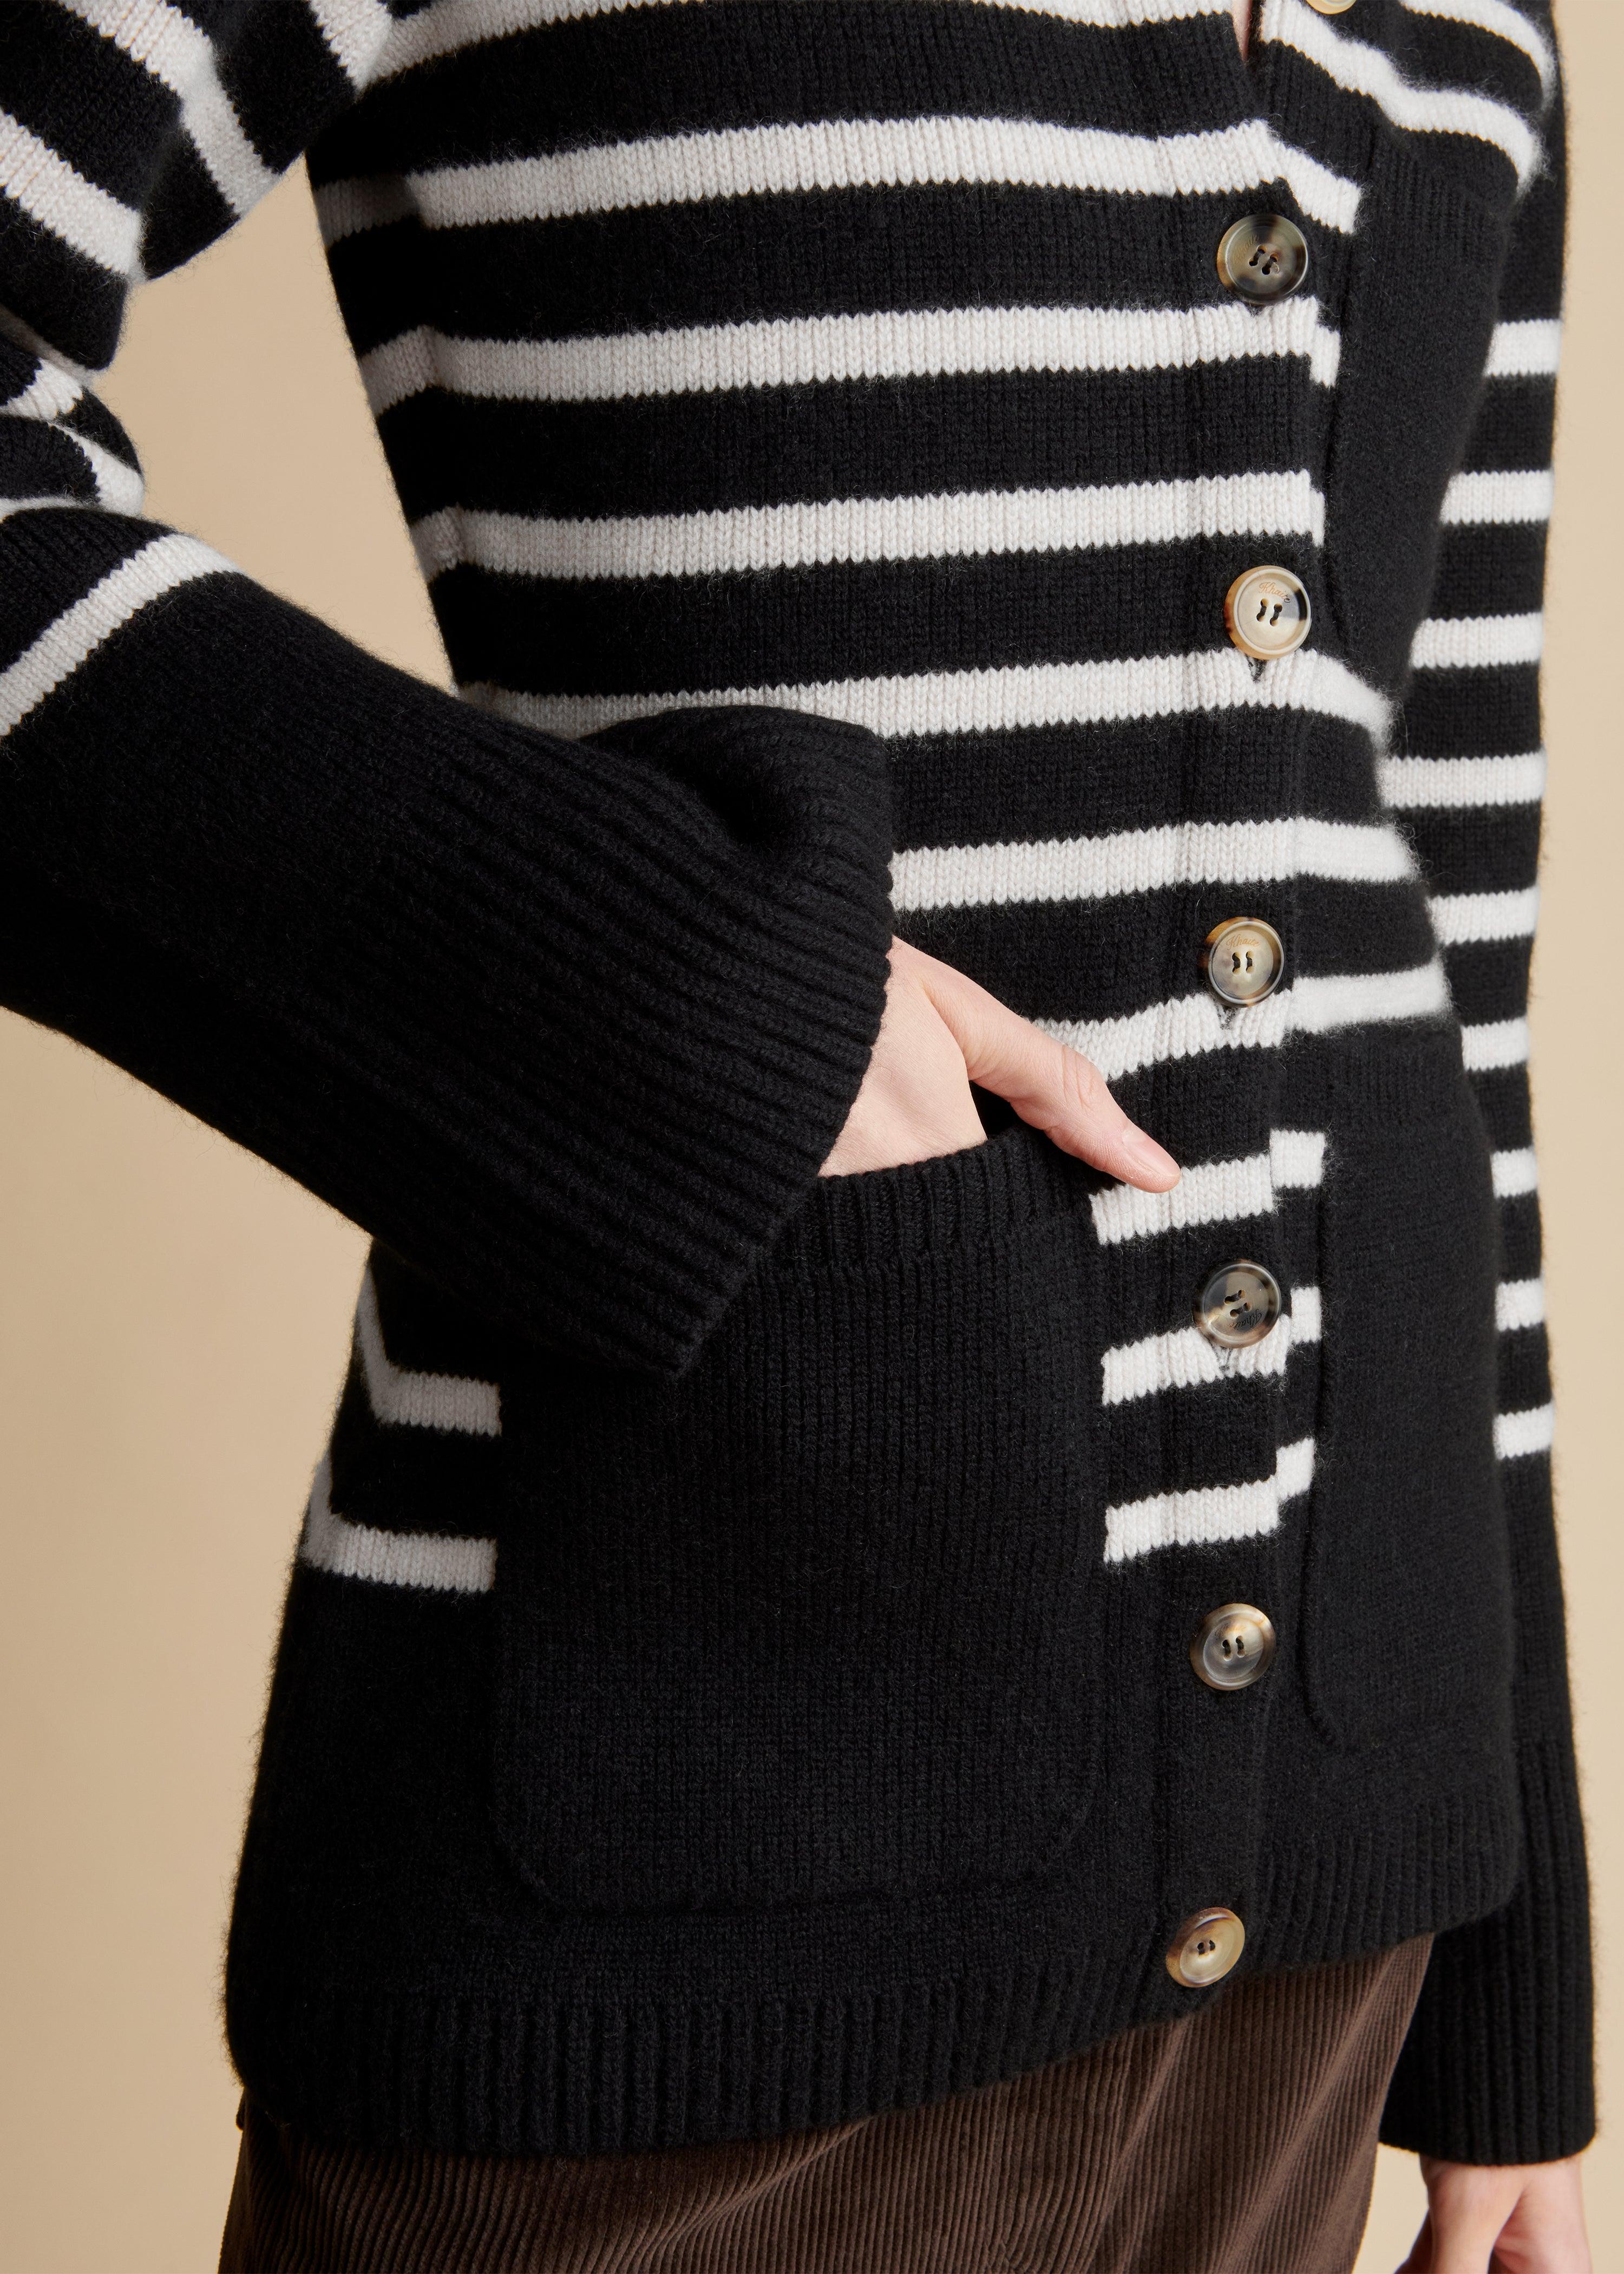 The Suzette Cardigan in Black and White Stripe - The Iconic Issue